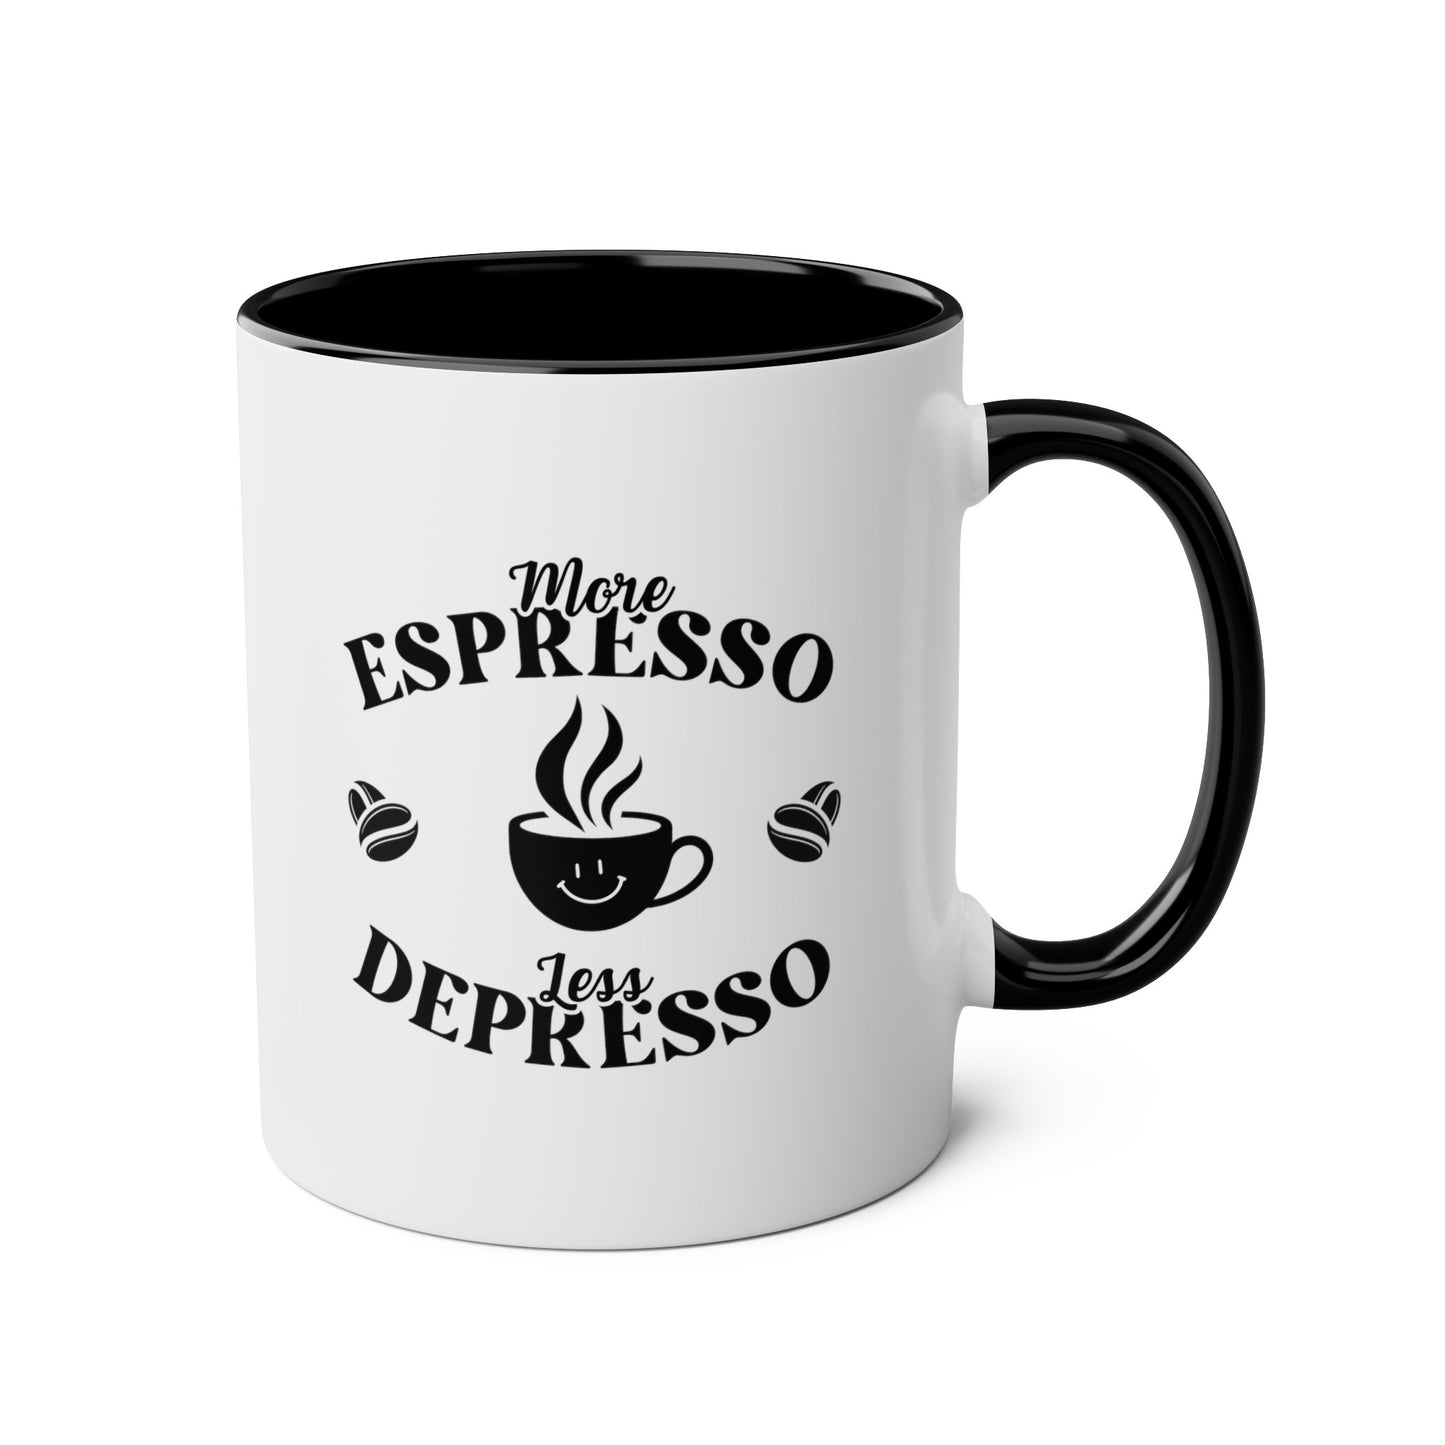 More Espresso Less Depresso 11oz white with black accent funny large coffee mug gift for caffeine lover sayings quotes retro bartender barista waveywares wavey wares wavywares wavy wares